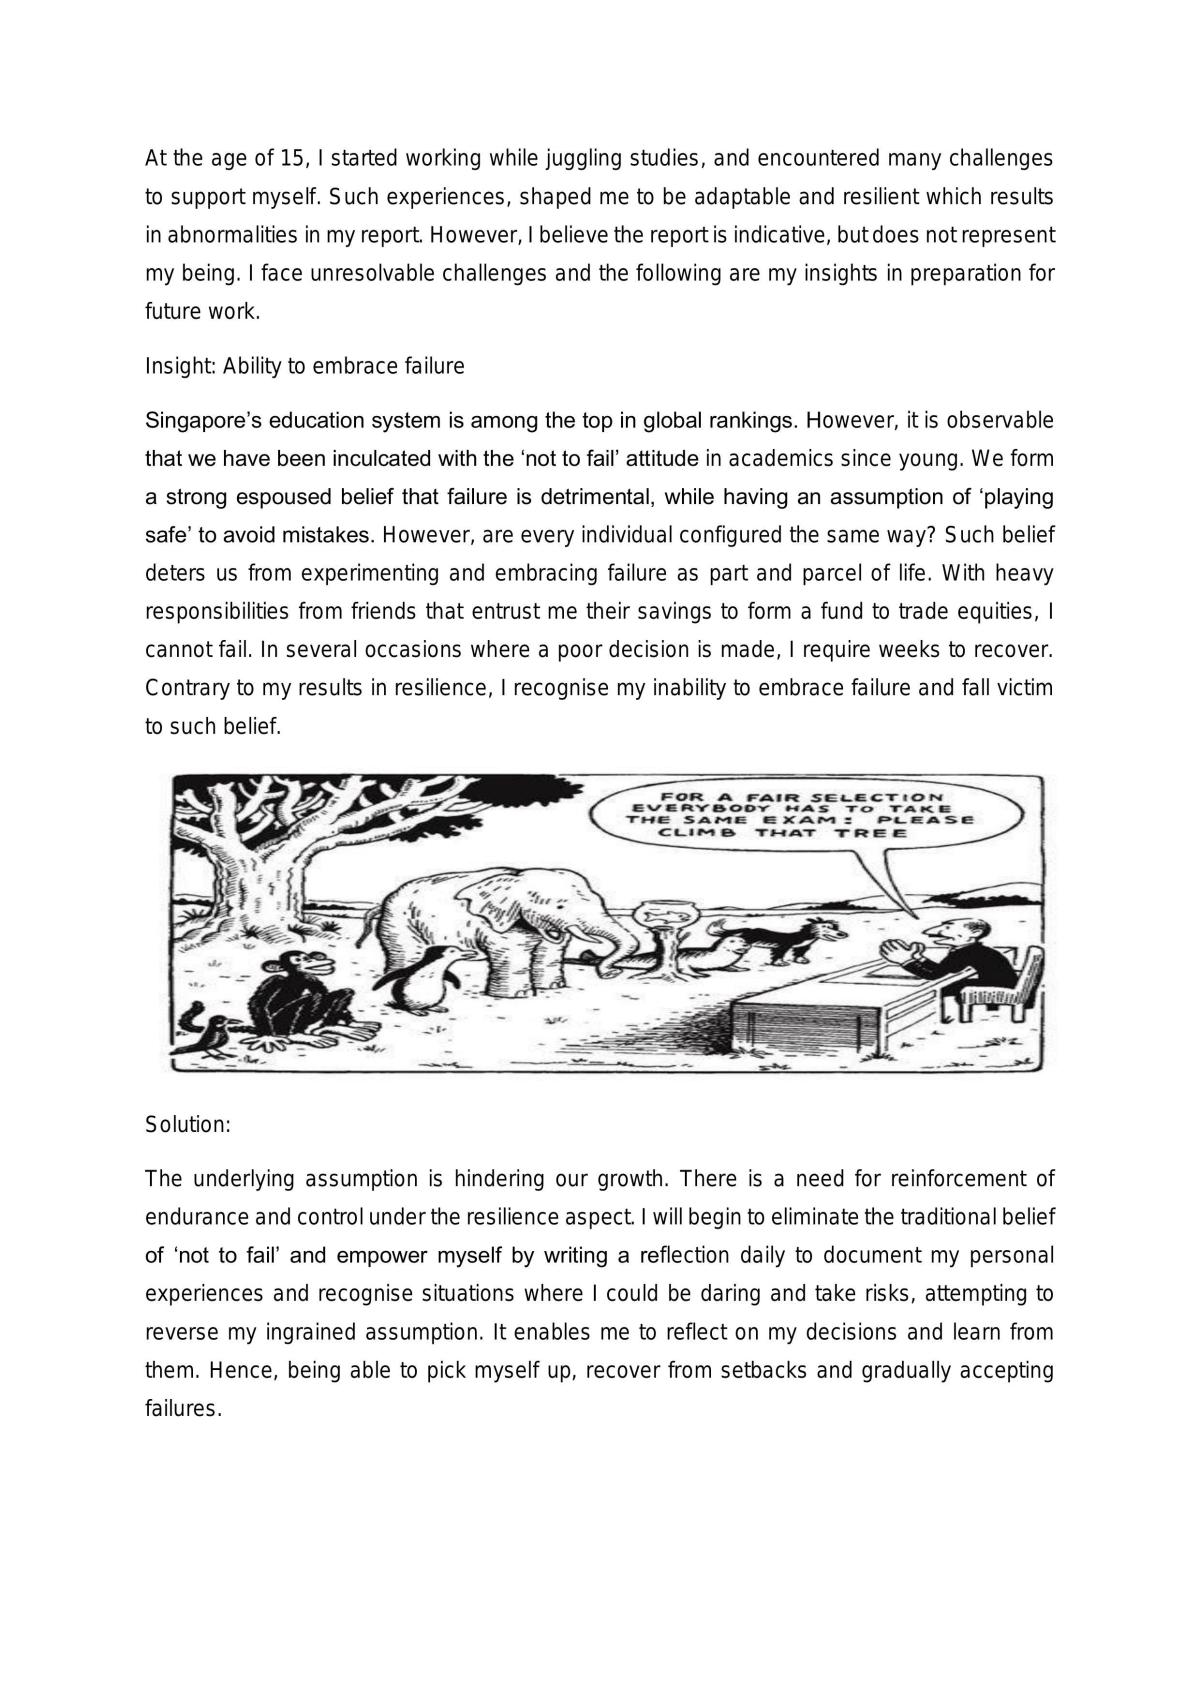 Competency writing - creative writing project - Page 1